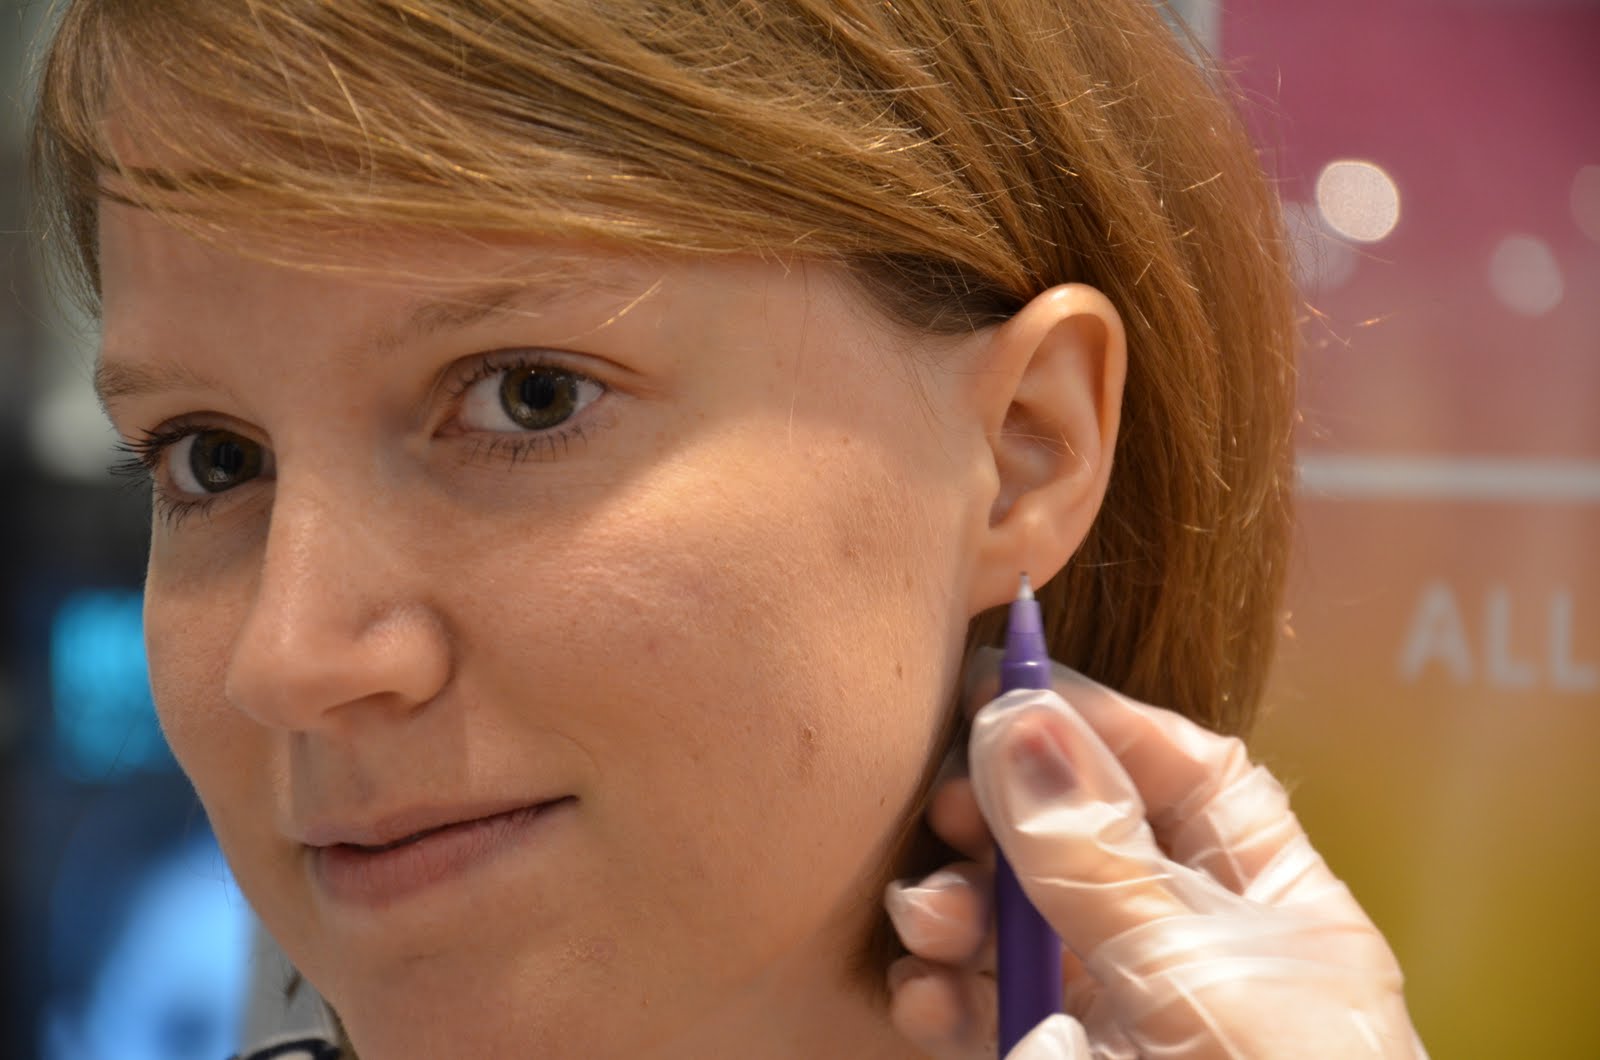 Normal Activities Step By Step For Getting Your Ears Pierced